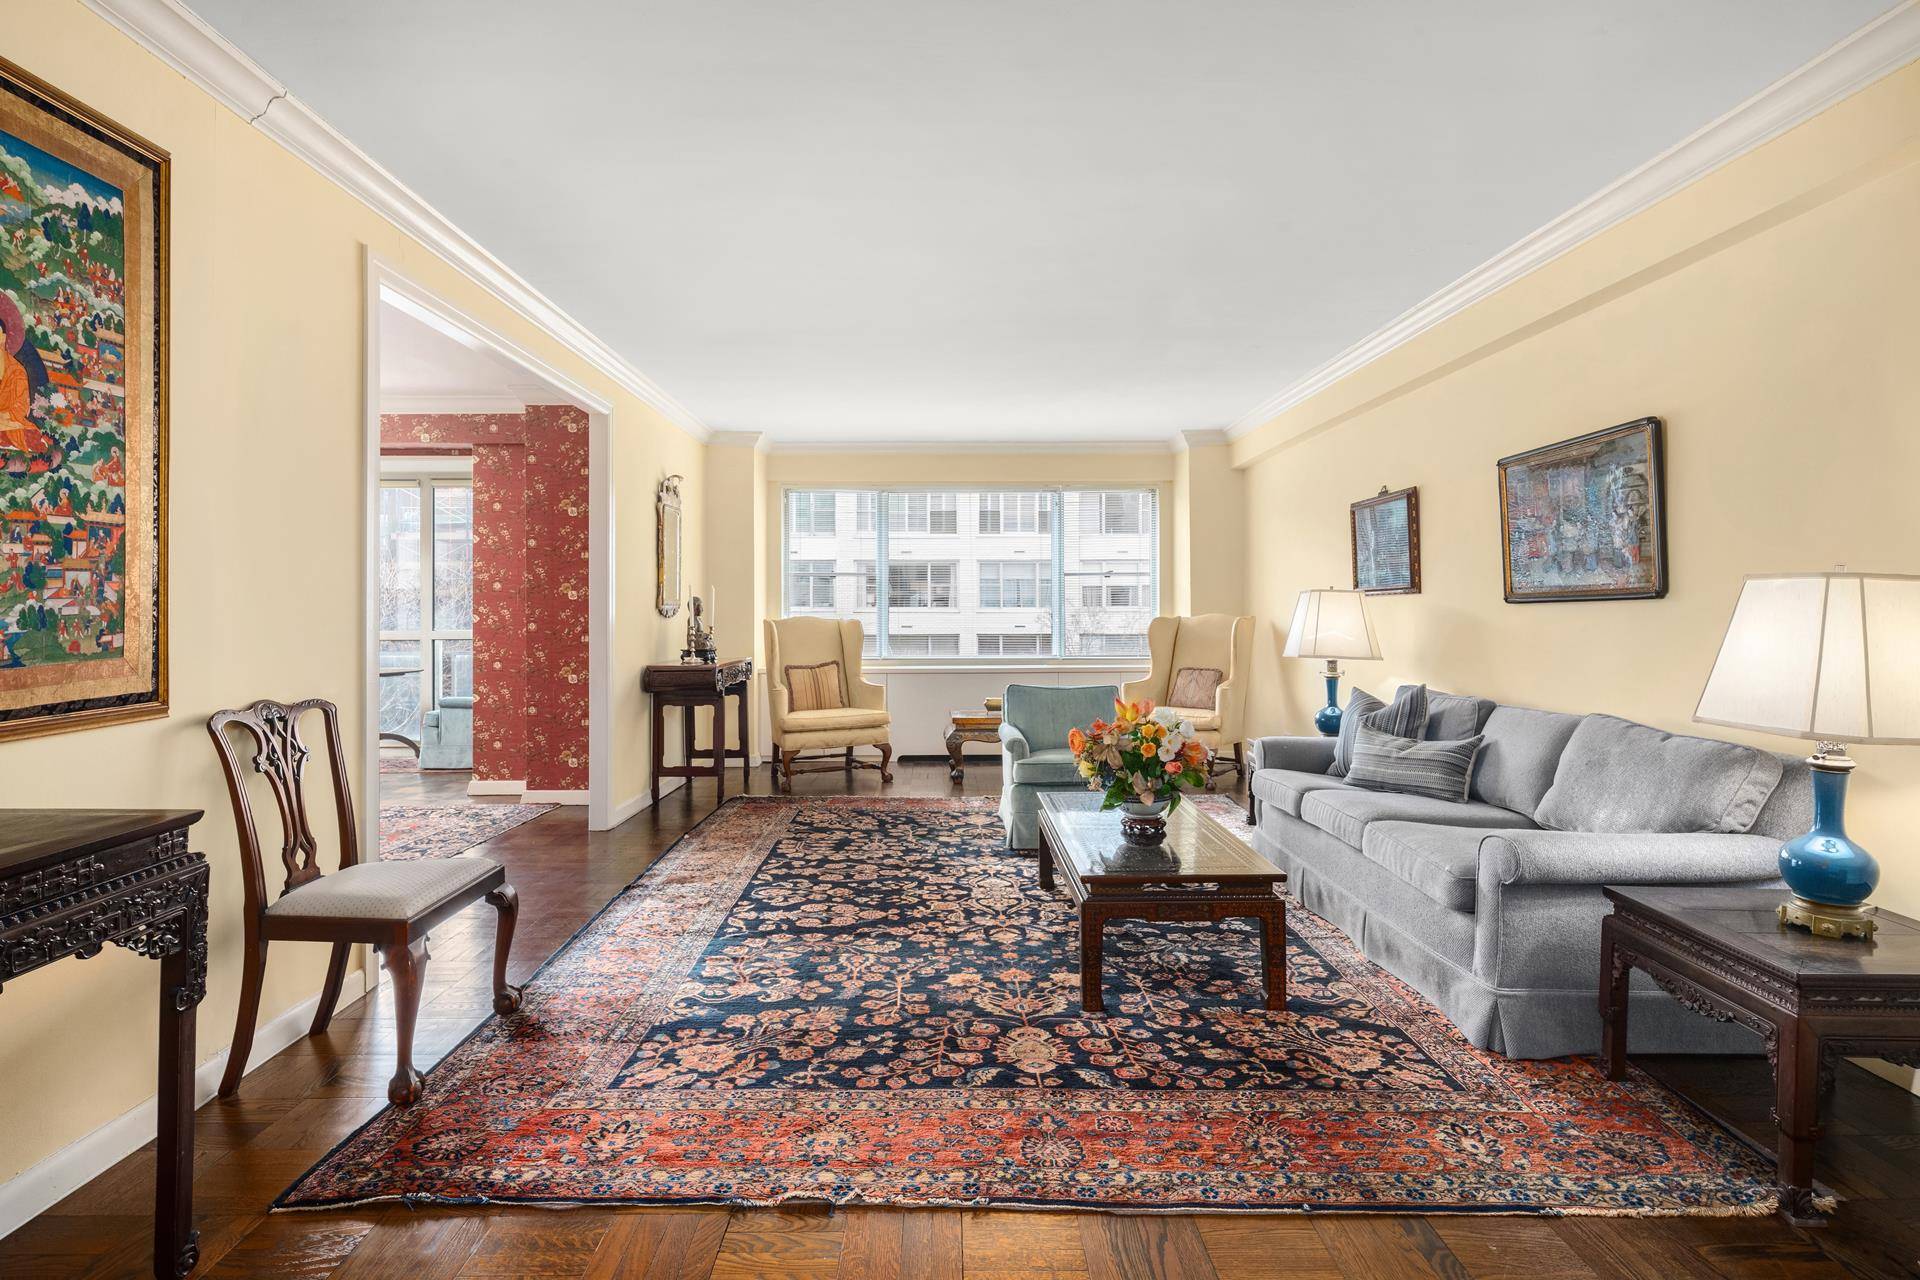 MAJOR PRICE REDUCTION. THE IMPERIAL HOUSE is one of Manhattan's most beautiful amp ; prestigious white glove cooperatives.